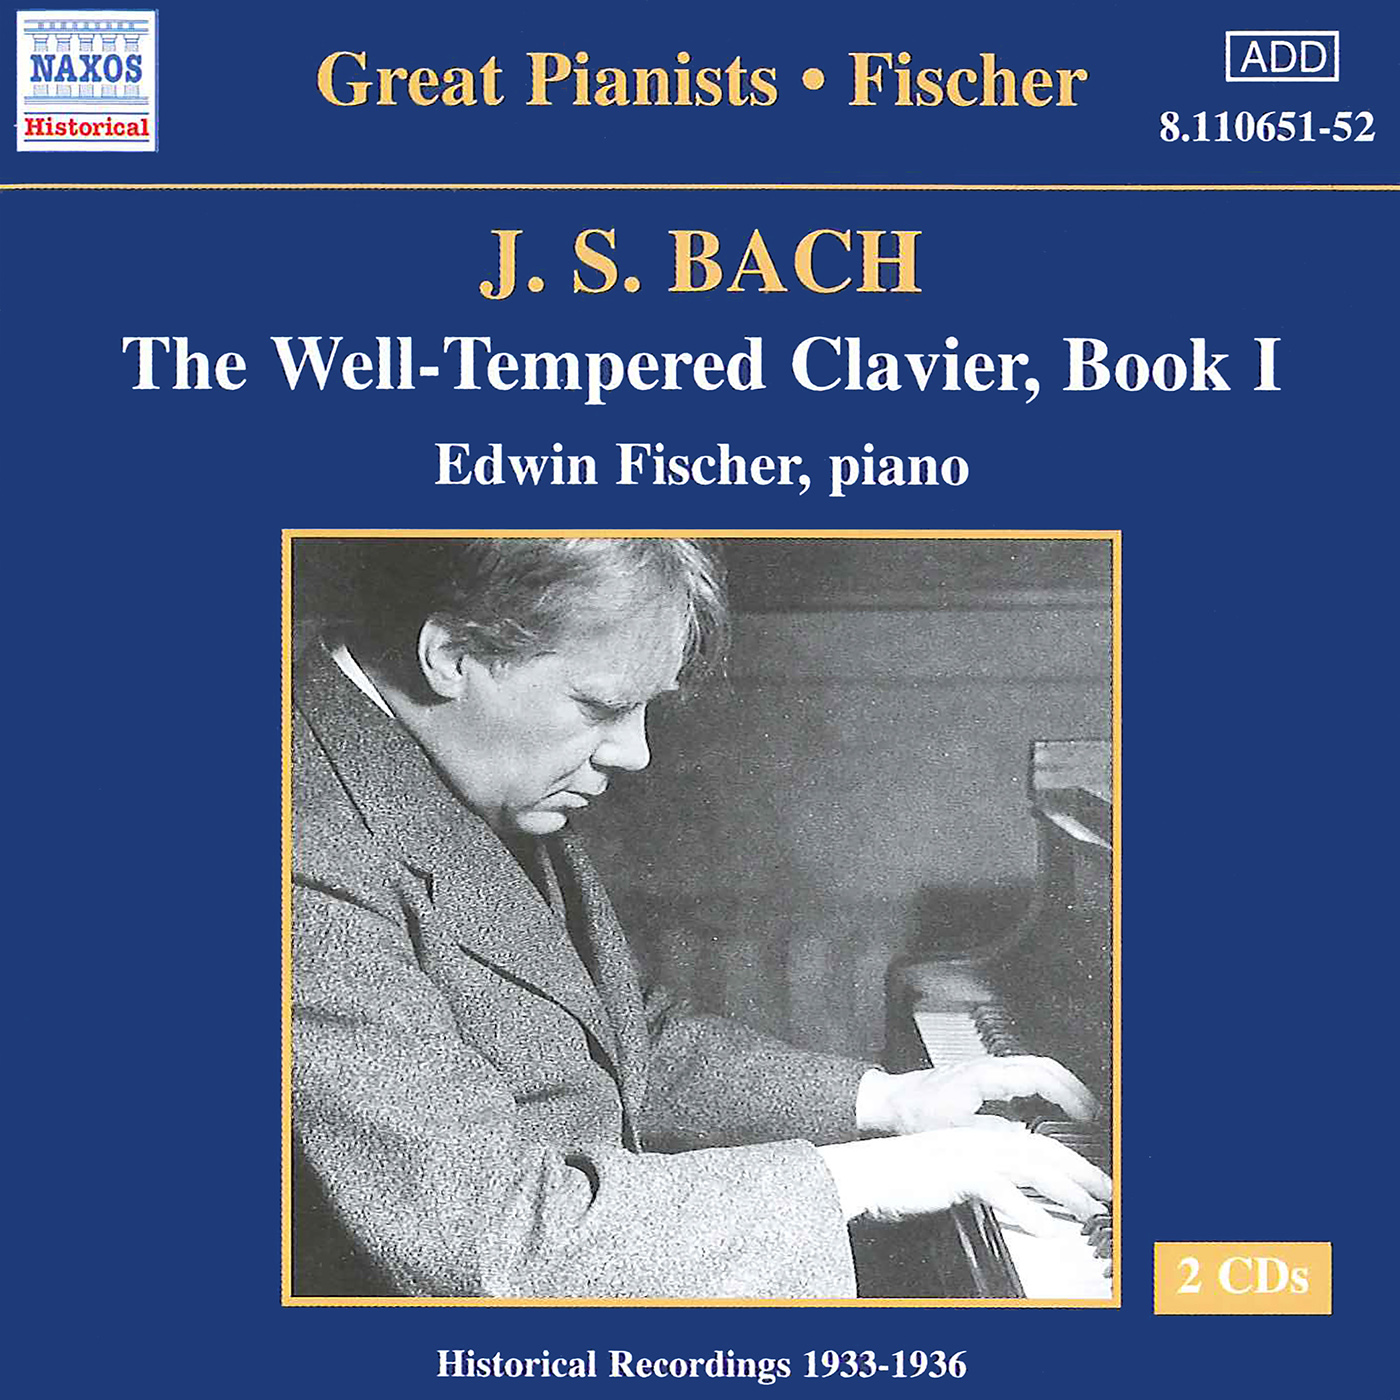 BACH, J.S.: Well-Tempered Clavier (The), Book 1 (Fischer) (1933-1934)